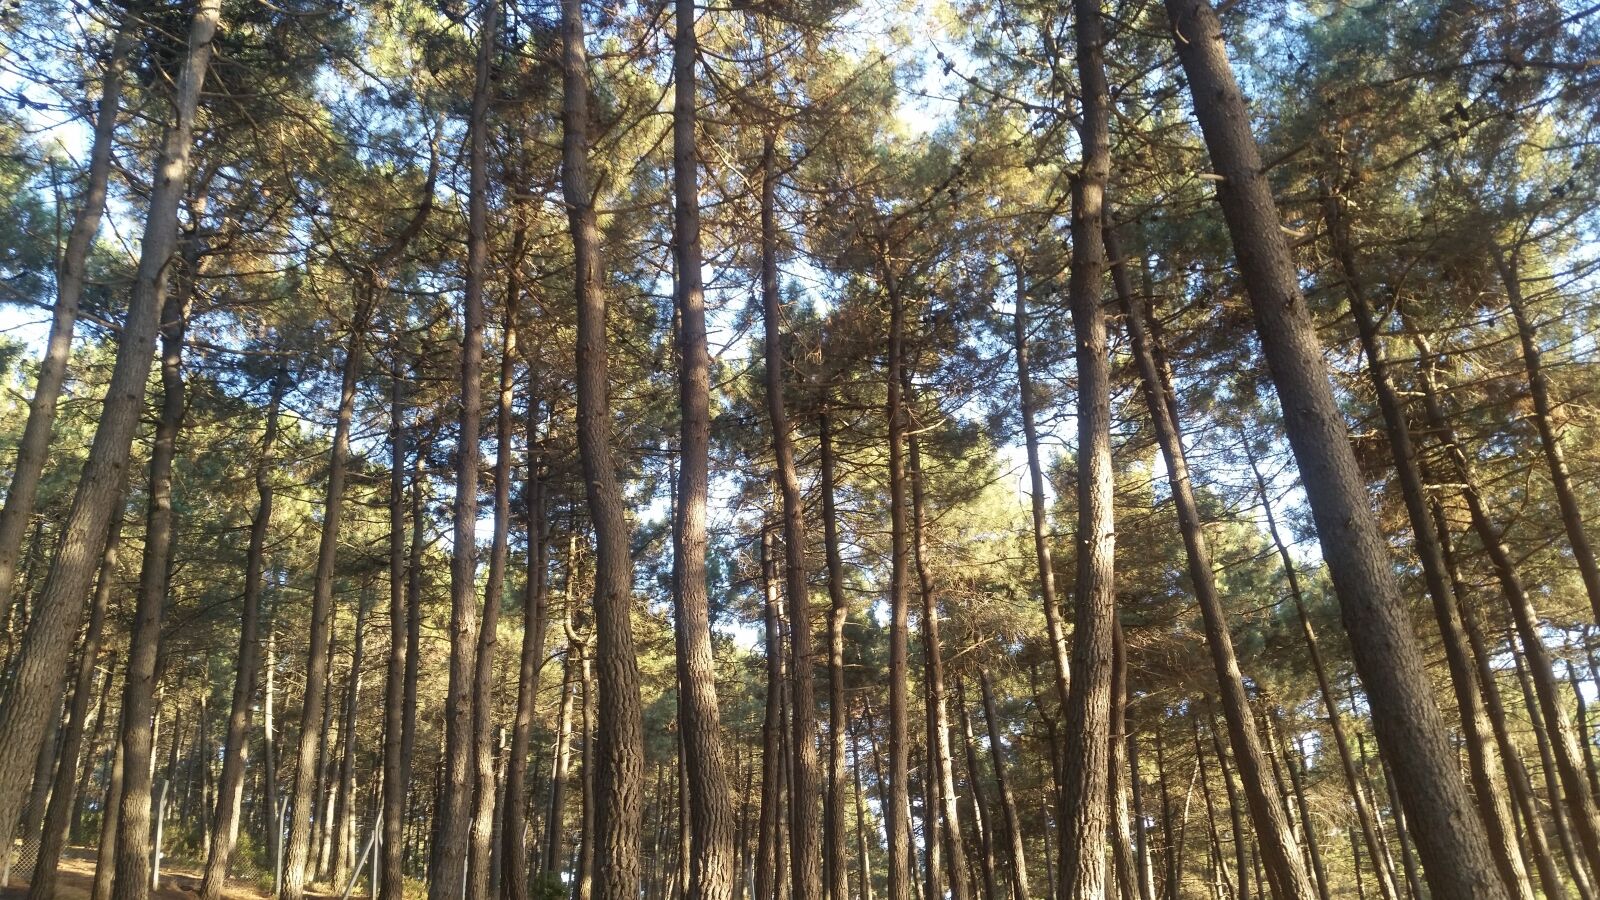 Samsung Galaxy S5 sample photo. Forest, tree, tall trees photography